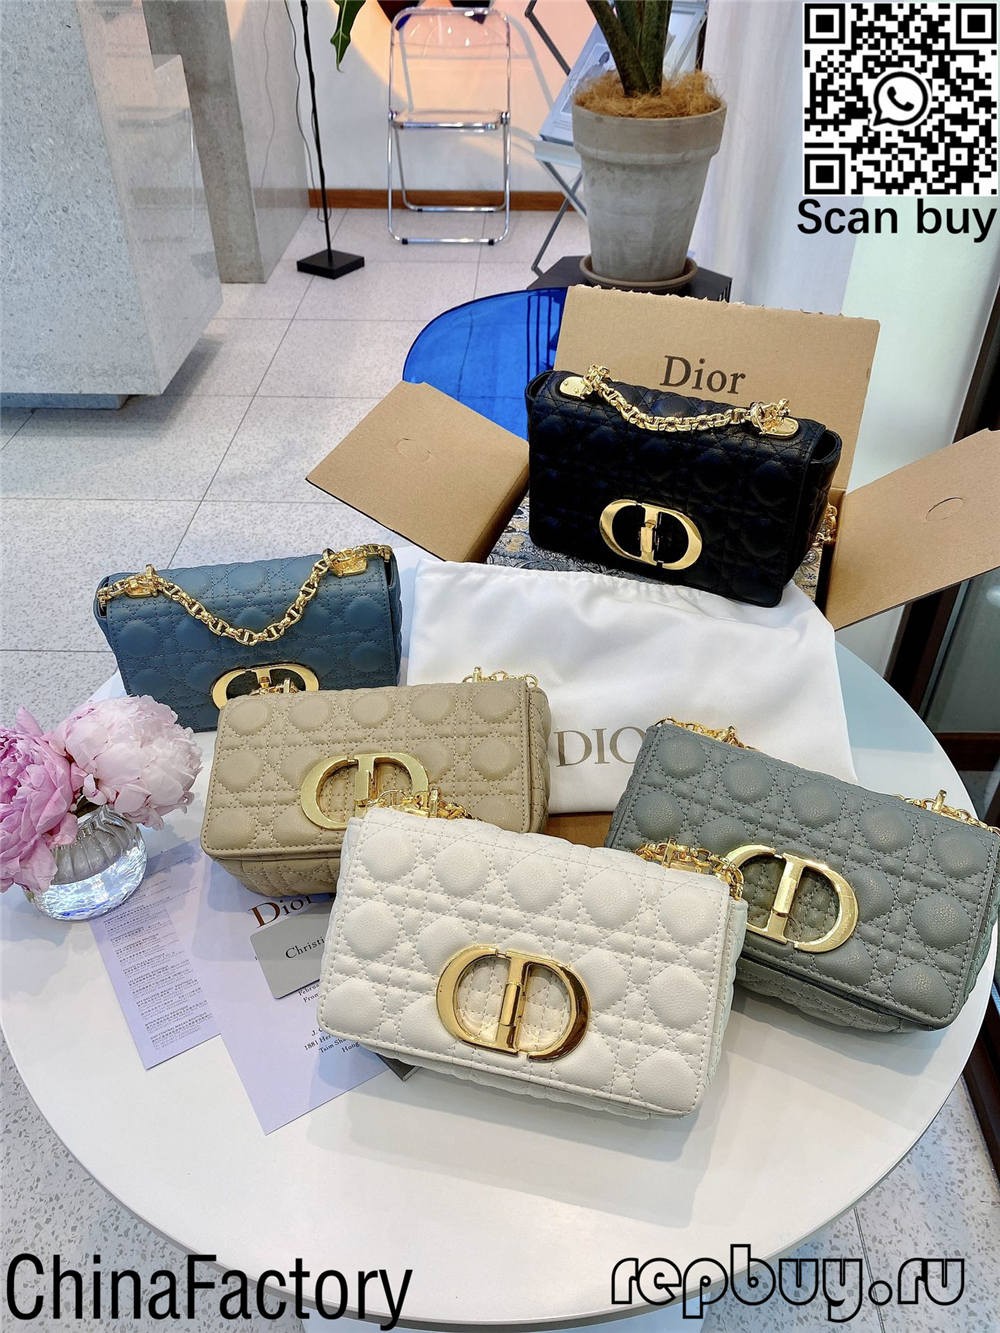 The most worth buying 6 brands of replica bags (2022 Updated)-Best Quality Fake Louis Vuitton Bag Online Store, Replica designer bag ru